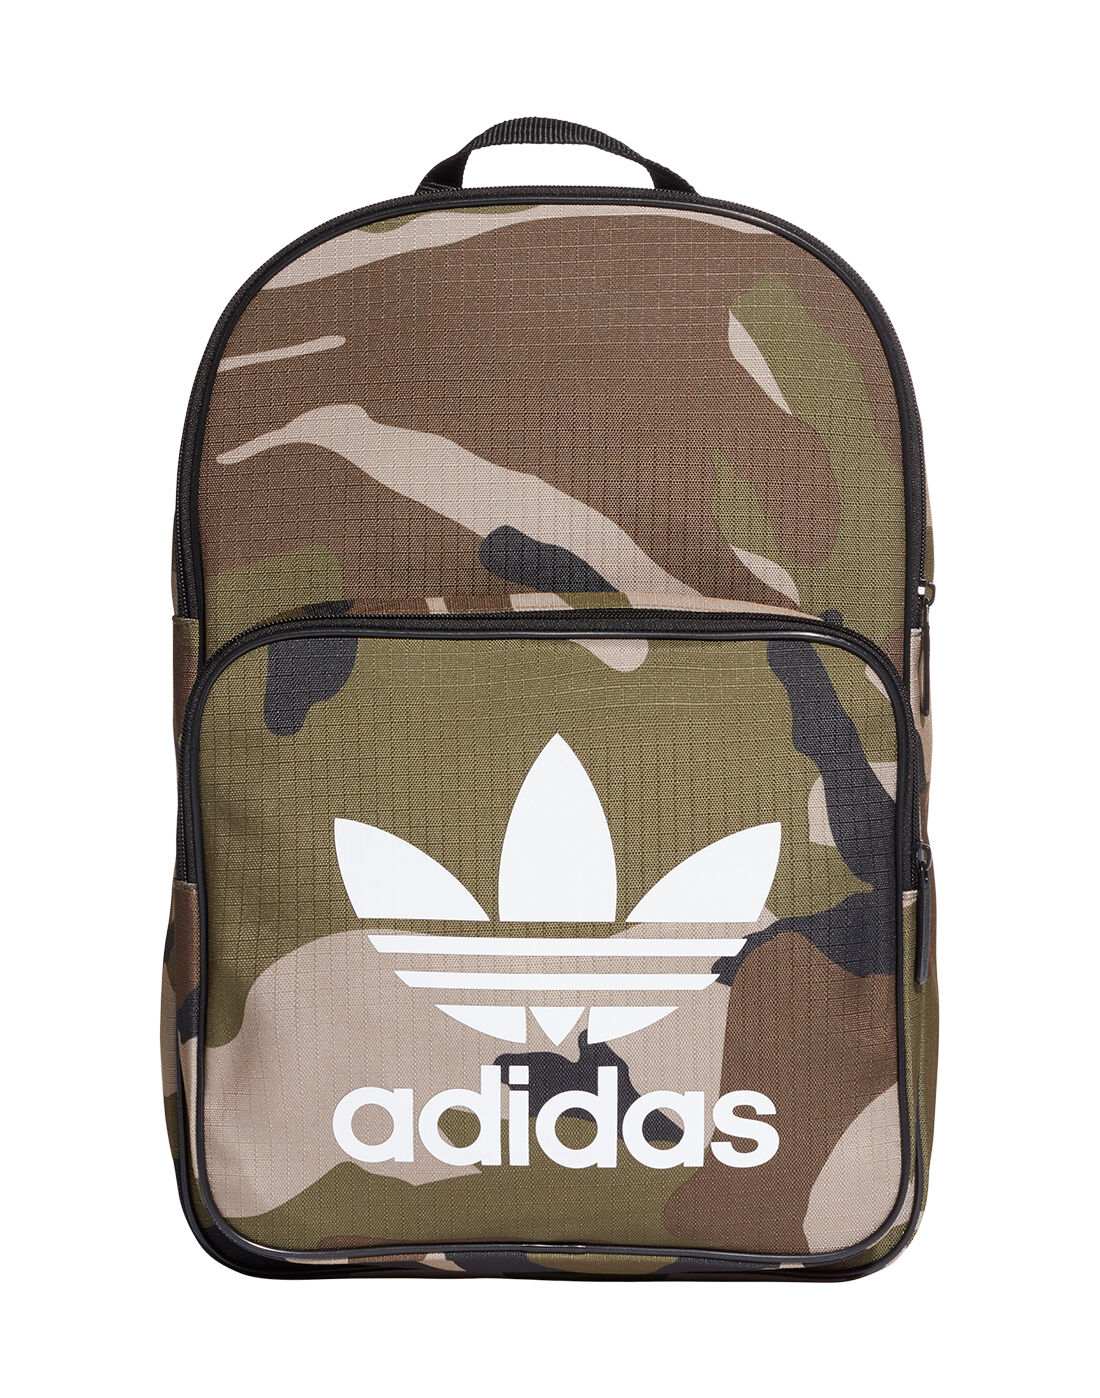 Green Camo adidas Backpack | Life Style 